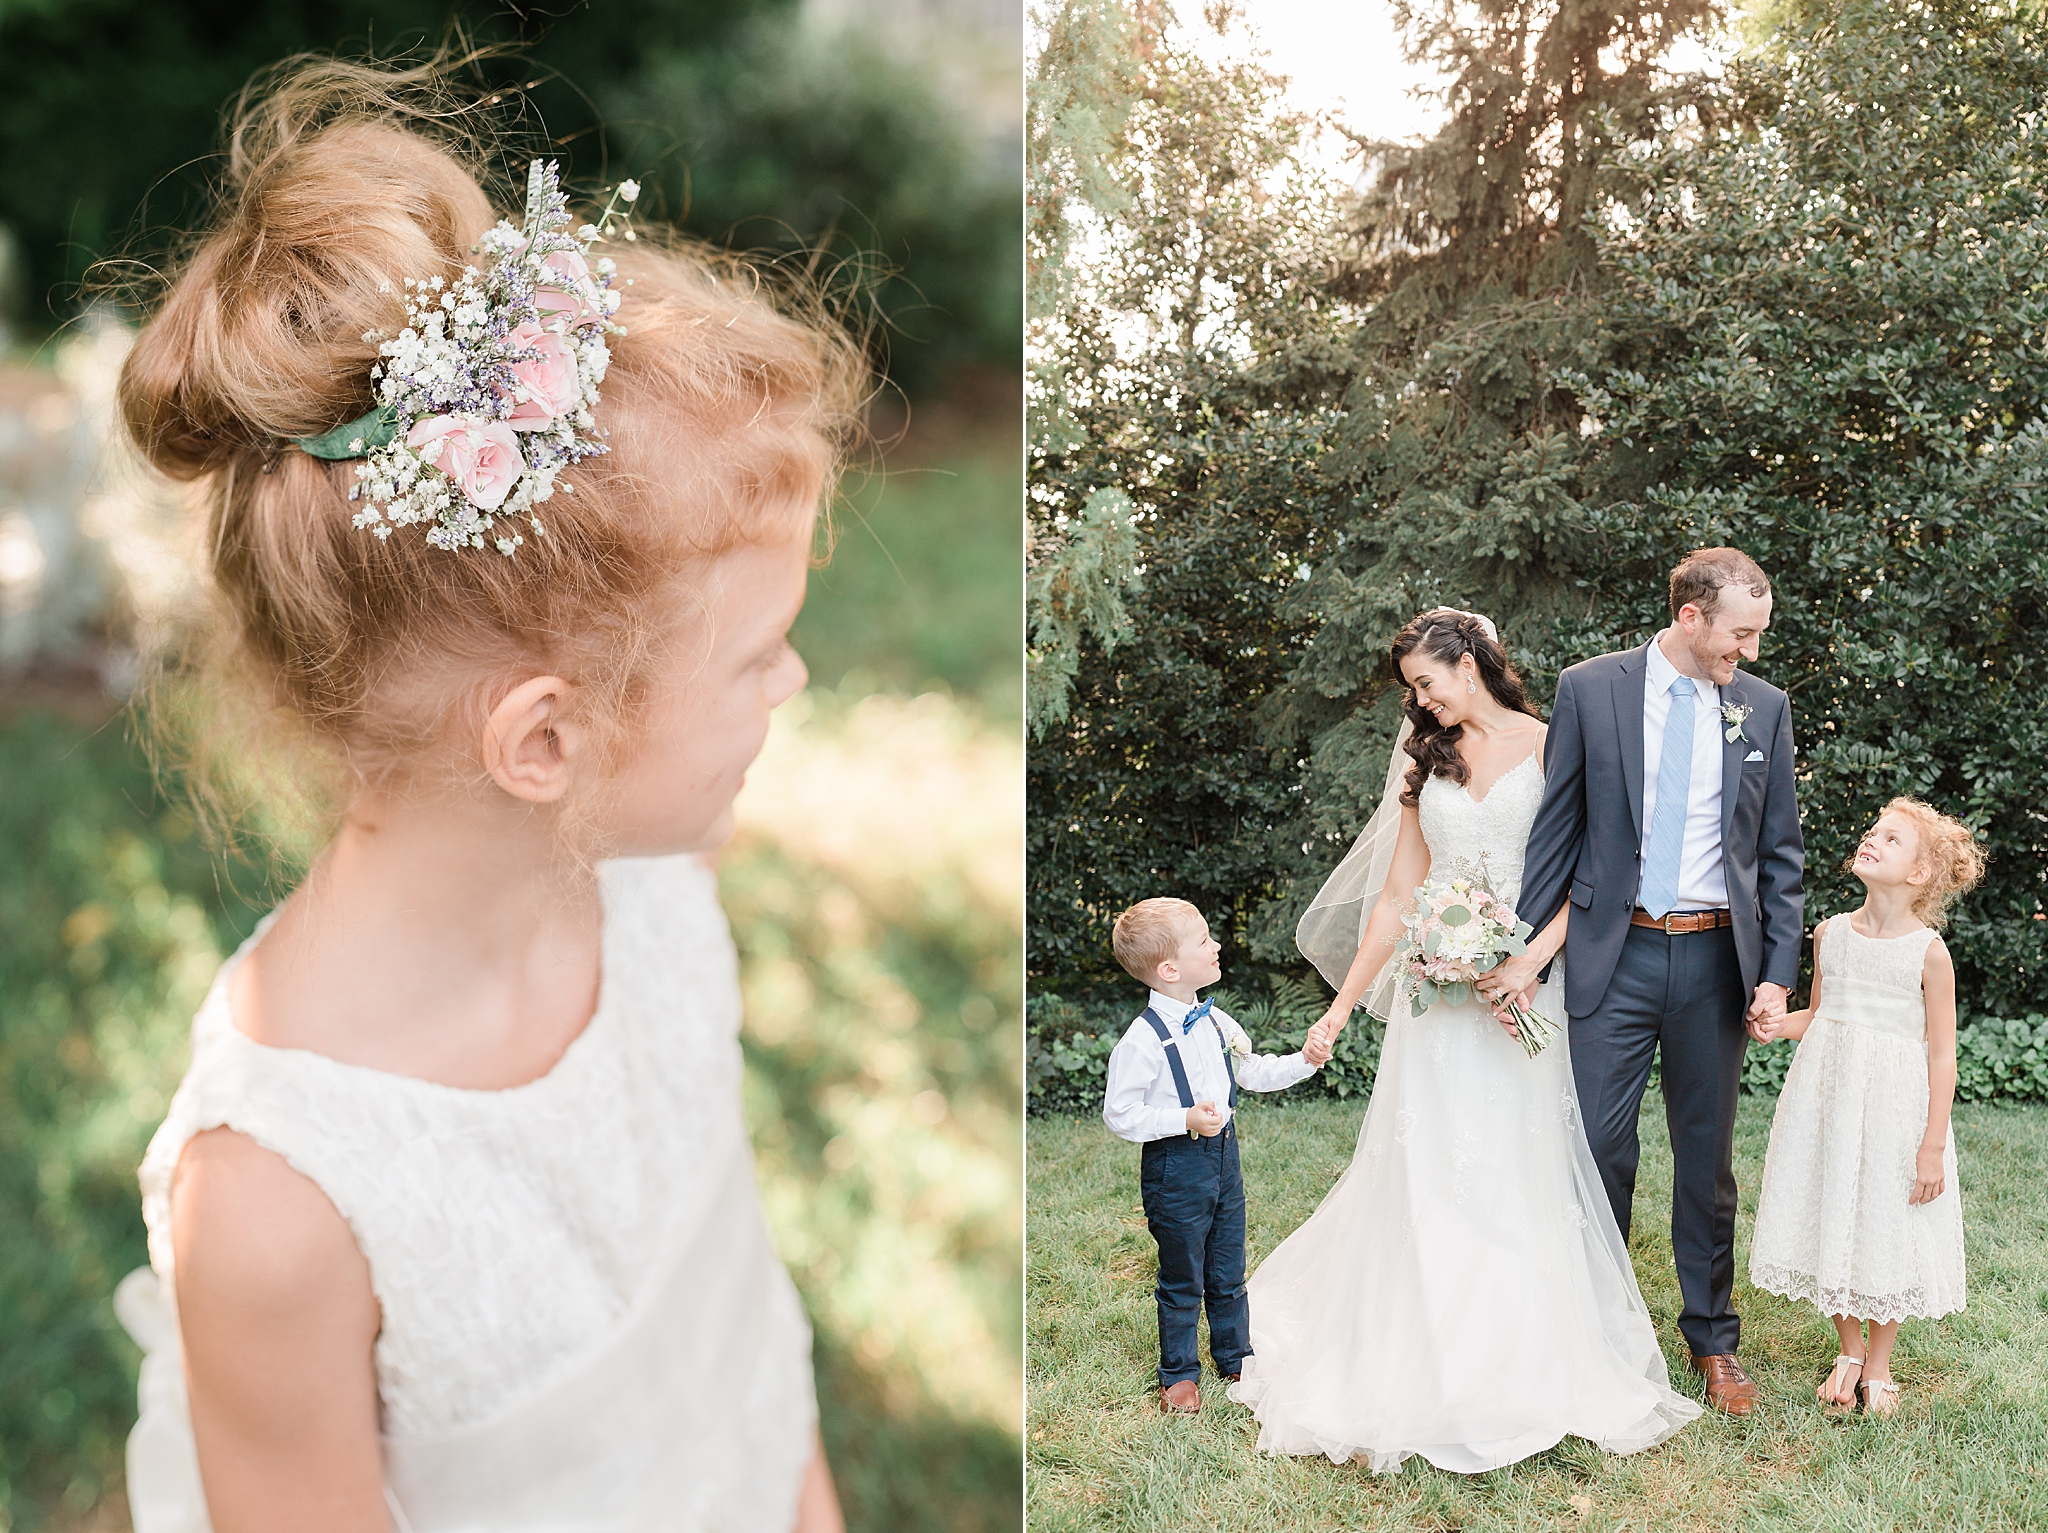 This Washington, DC wedding photographer discusses the pros and cons to having children in attendance at your wedding celebrating.